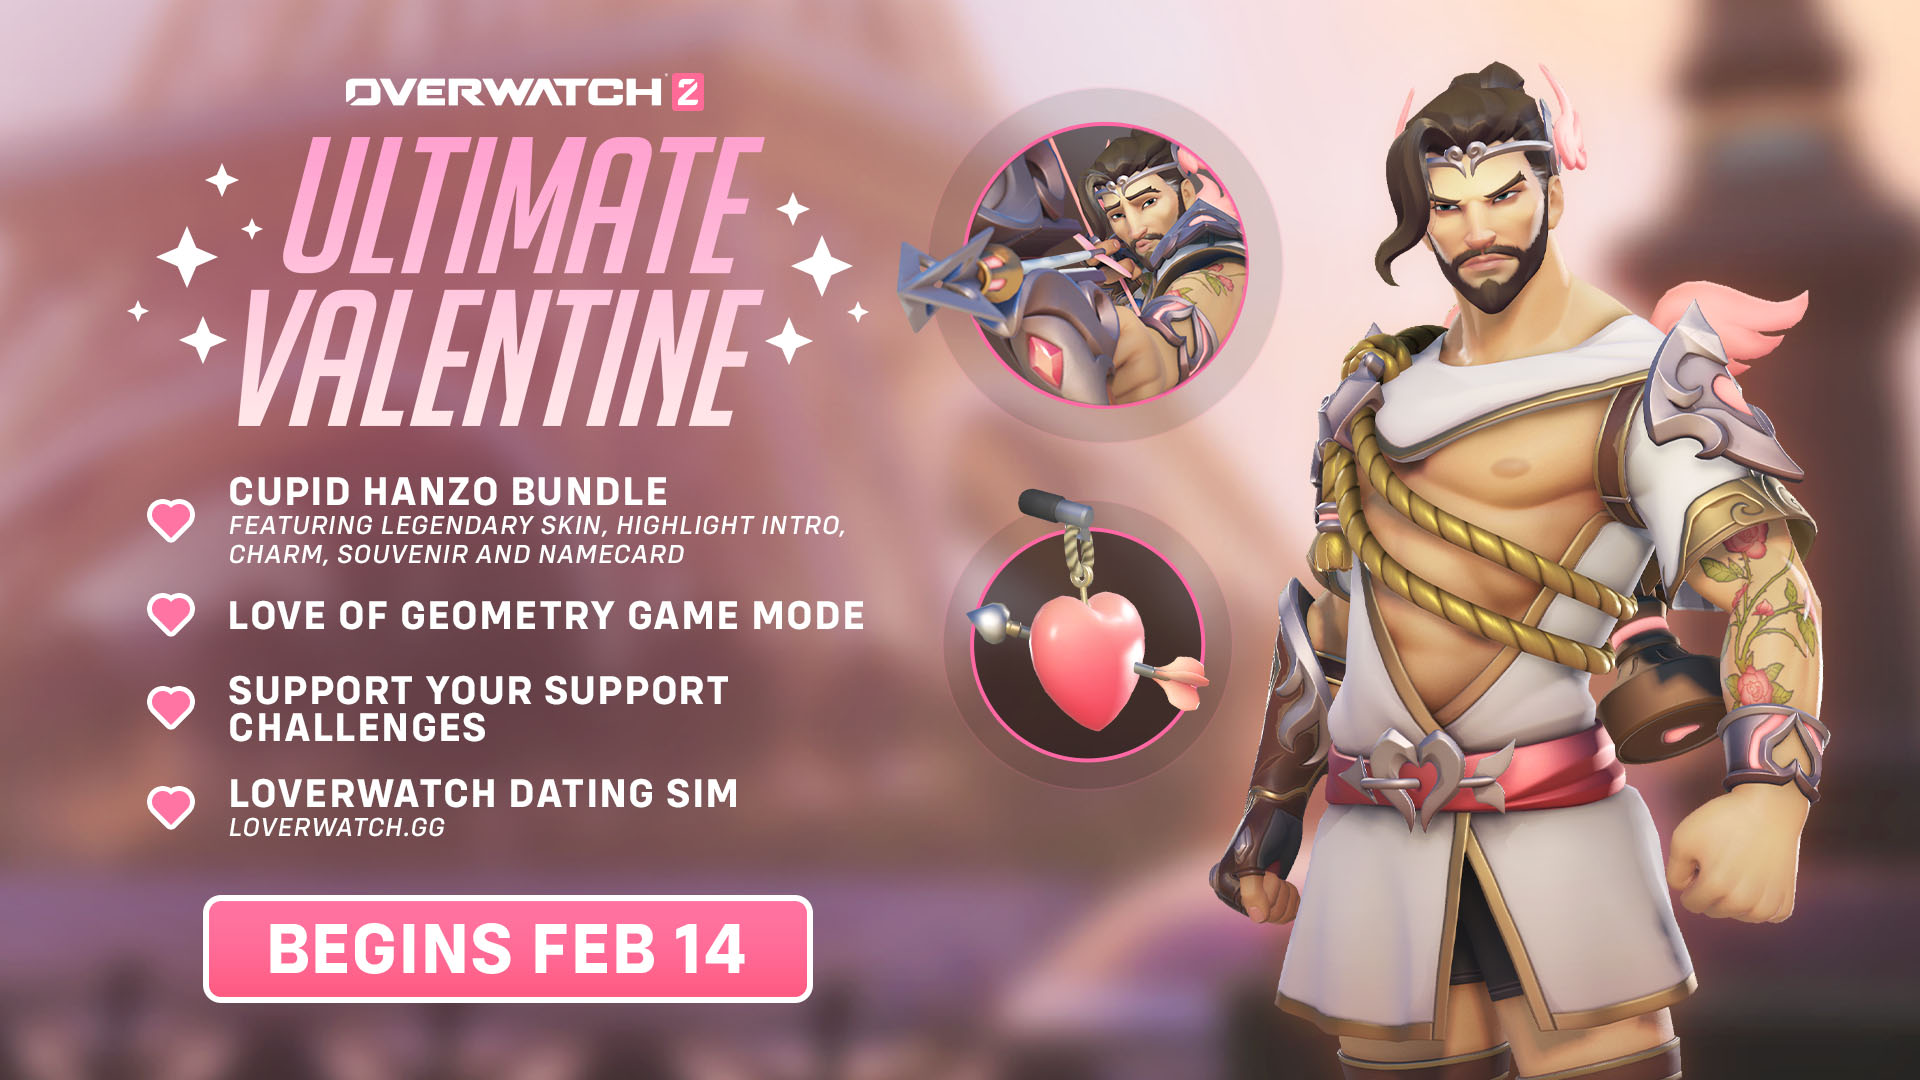 Overwatch fans, get on the point and get a Legendary item with